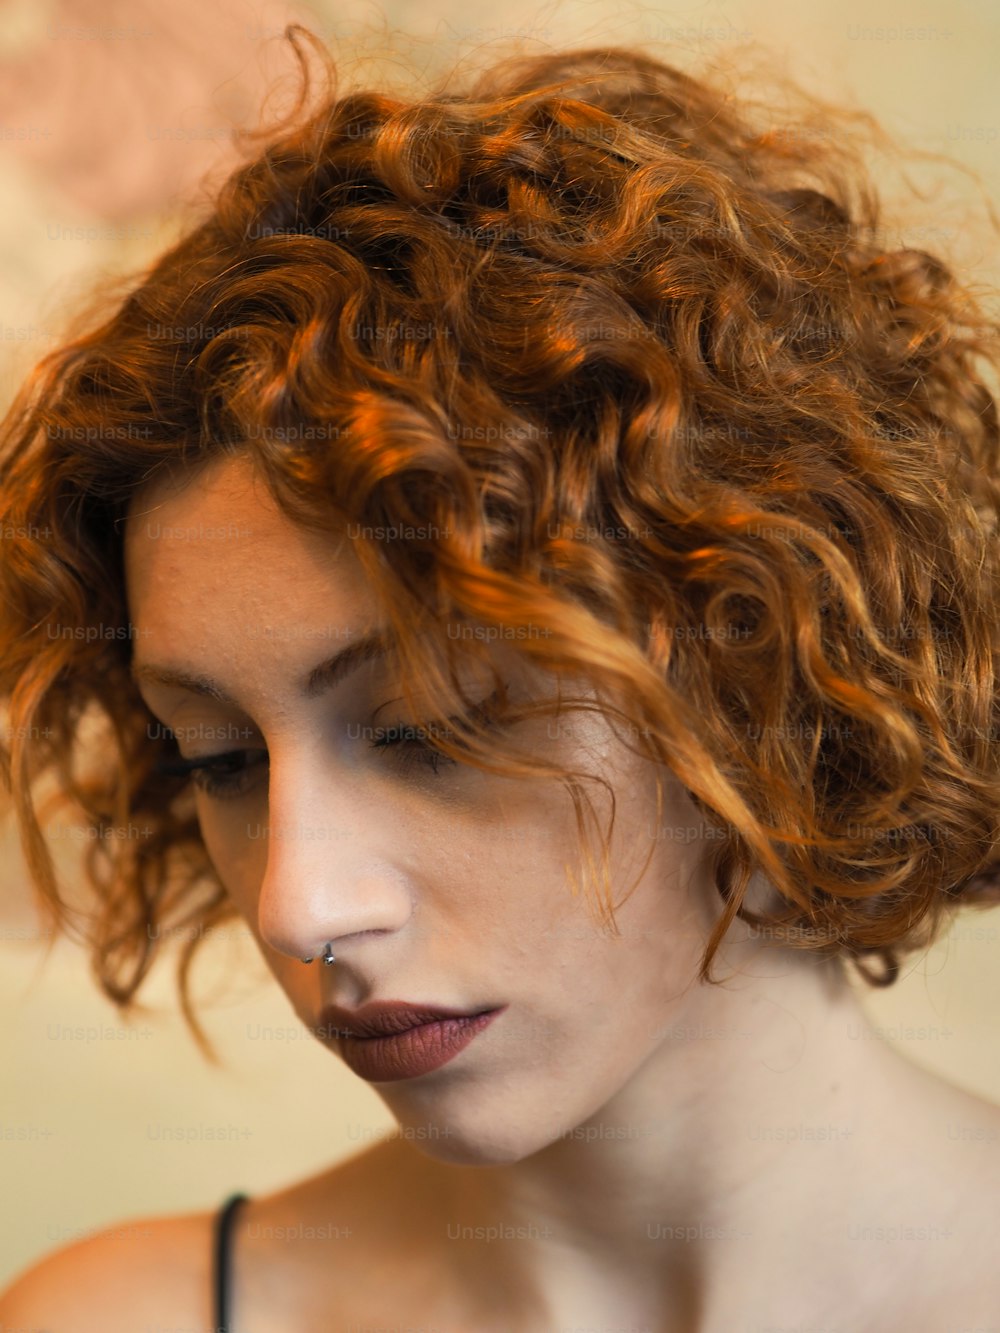 a woman with curly hair